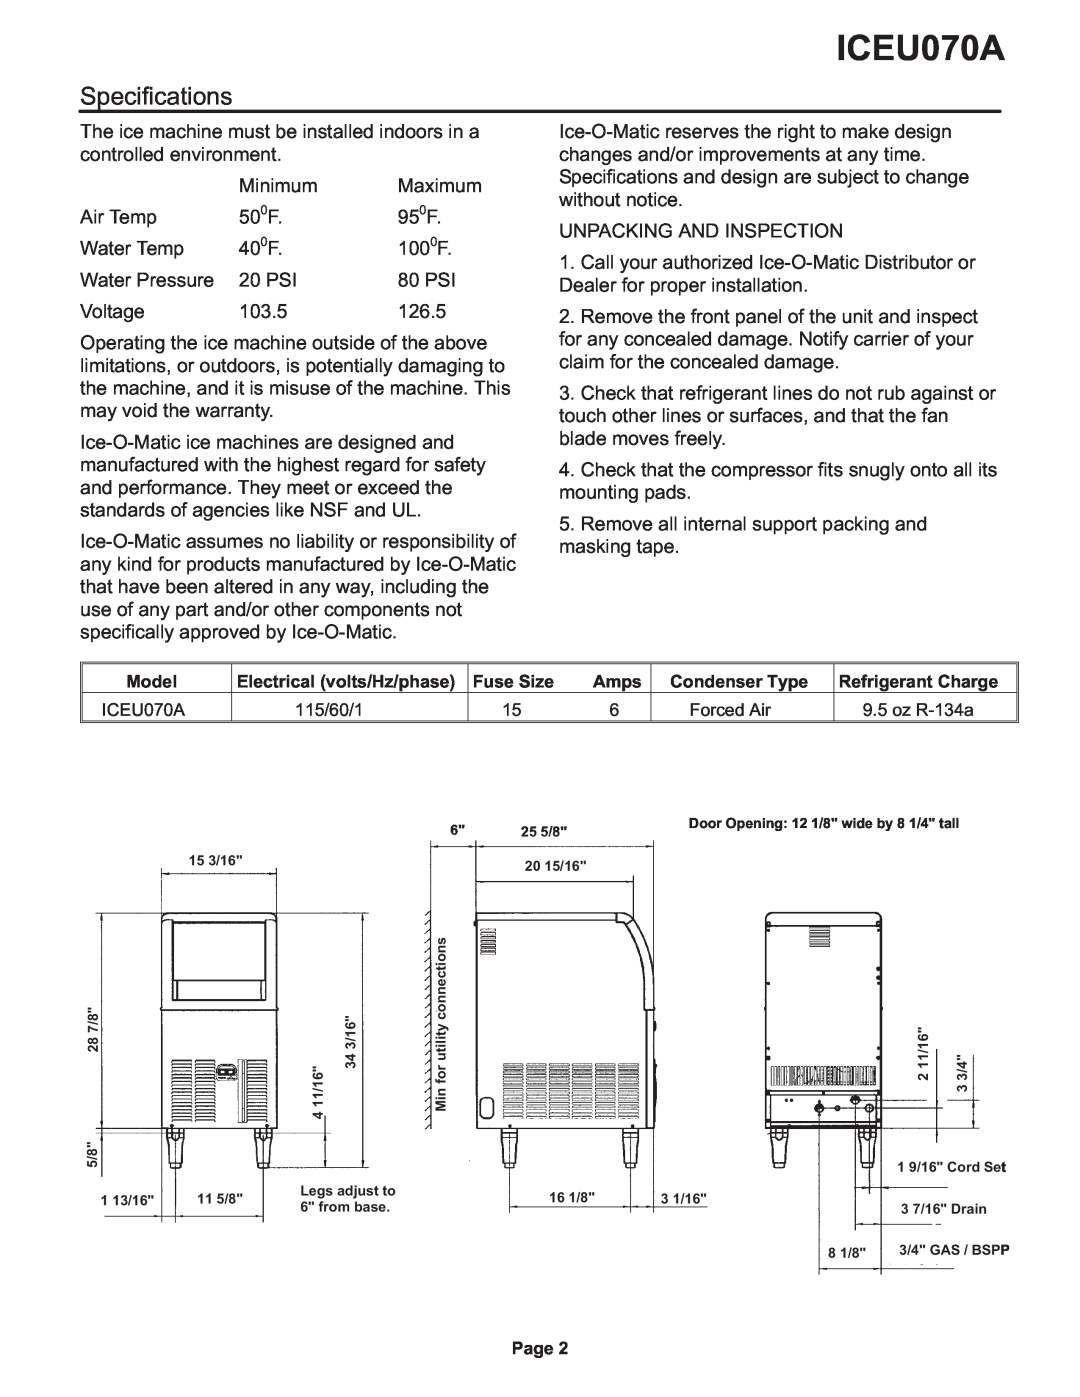 Ice-O-Matic ICEU070A installation manual Specifications 